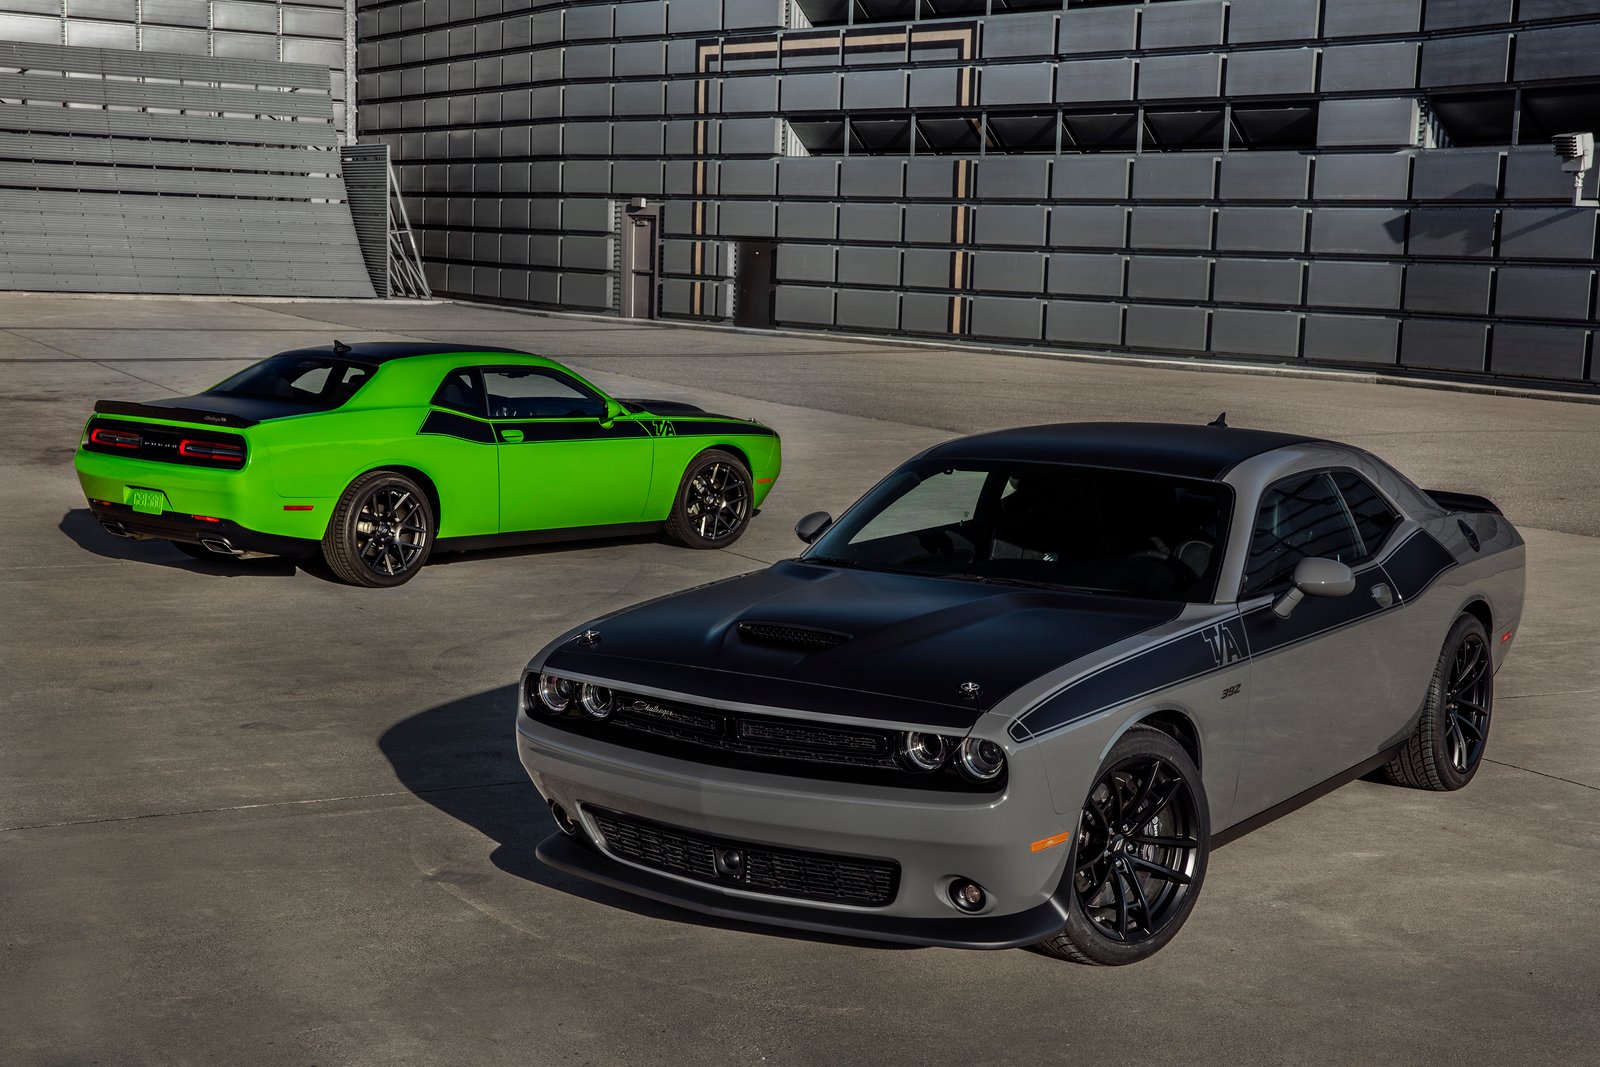 2017 Dodge Challenger T/A 392 (foreground) and 2017 Dodge Challe